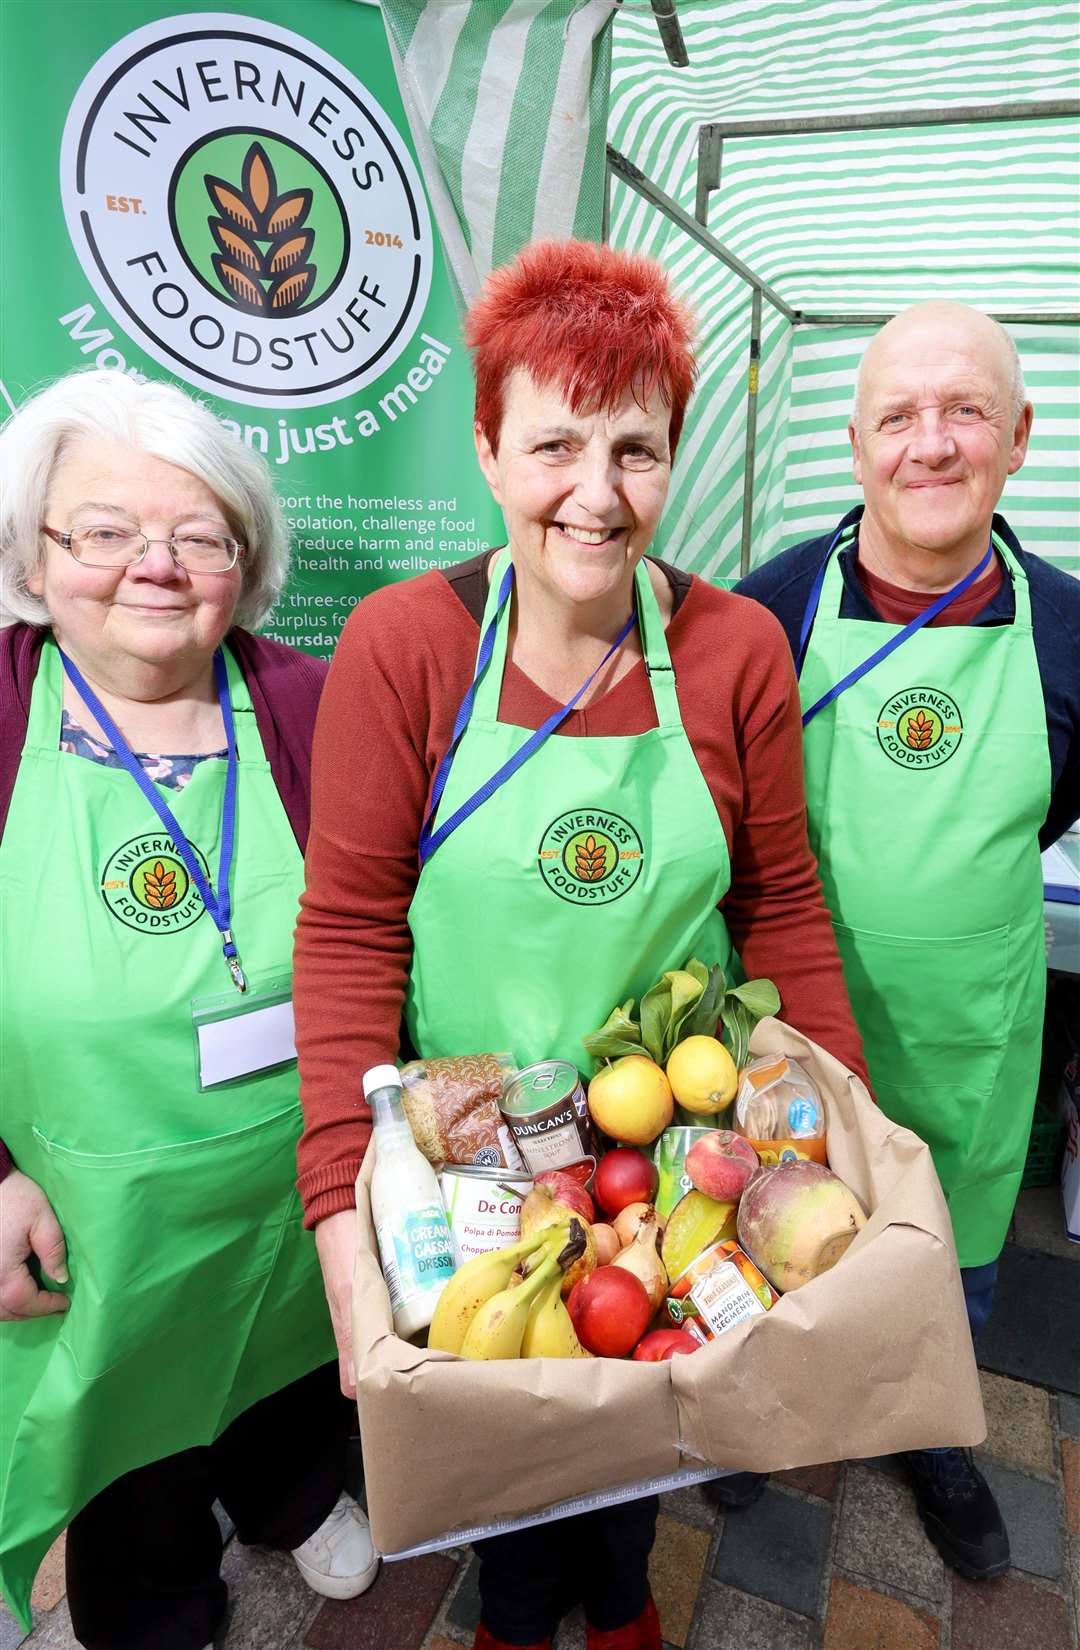 Margaret Macdonald, Pam Urquhart and Dave Kemp from Inverness Foodstuff. Picture: James Mackenzie